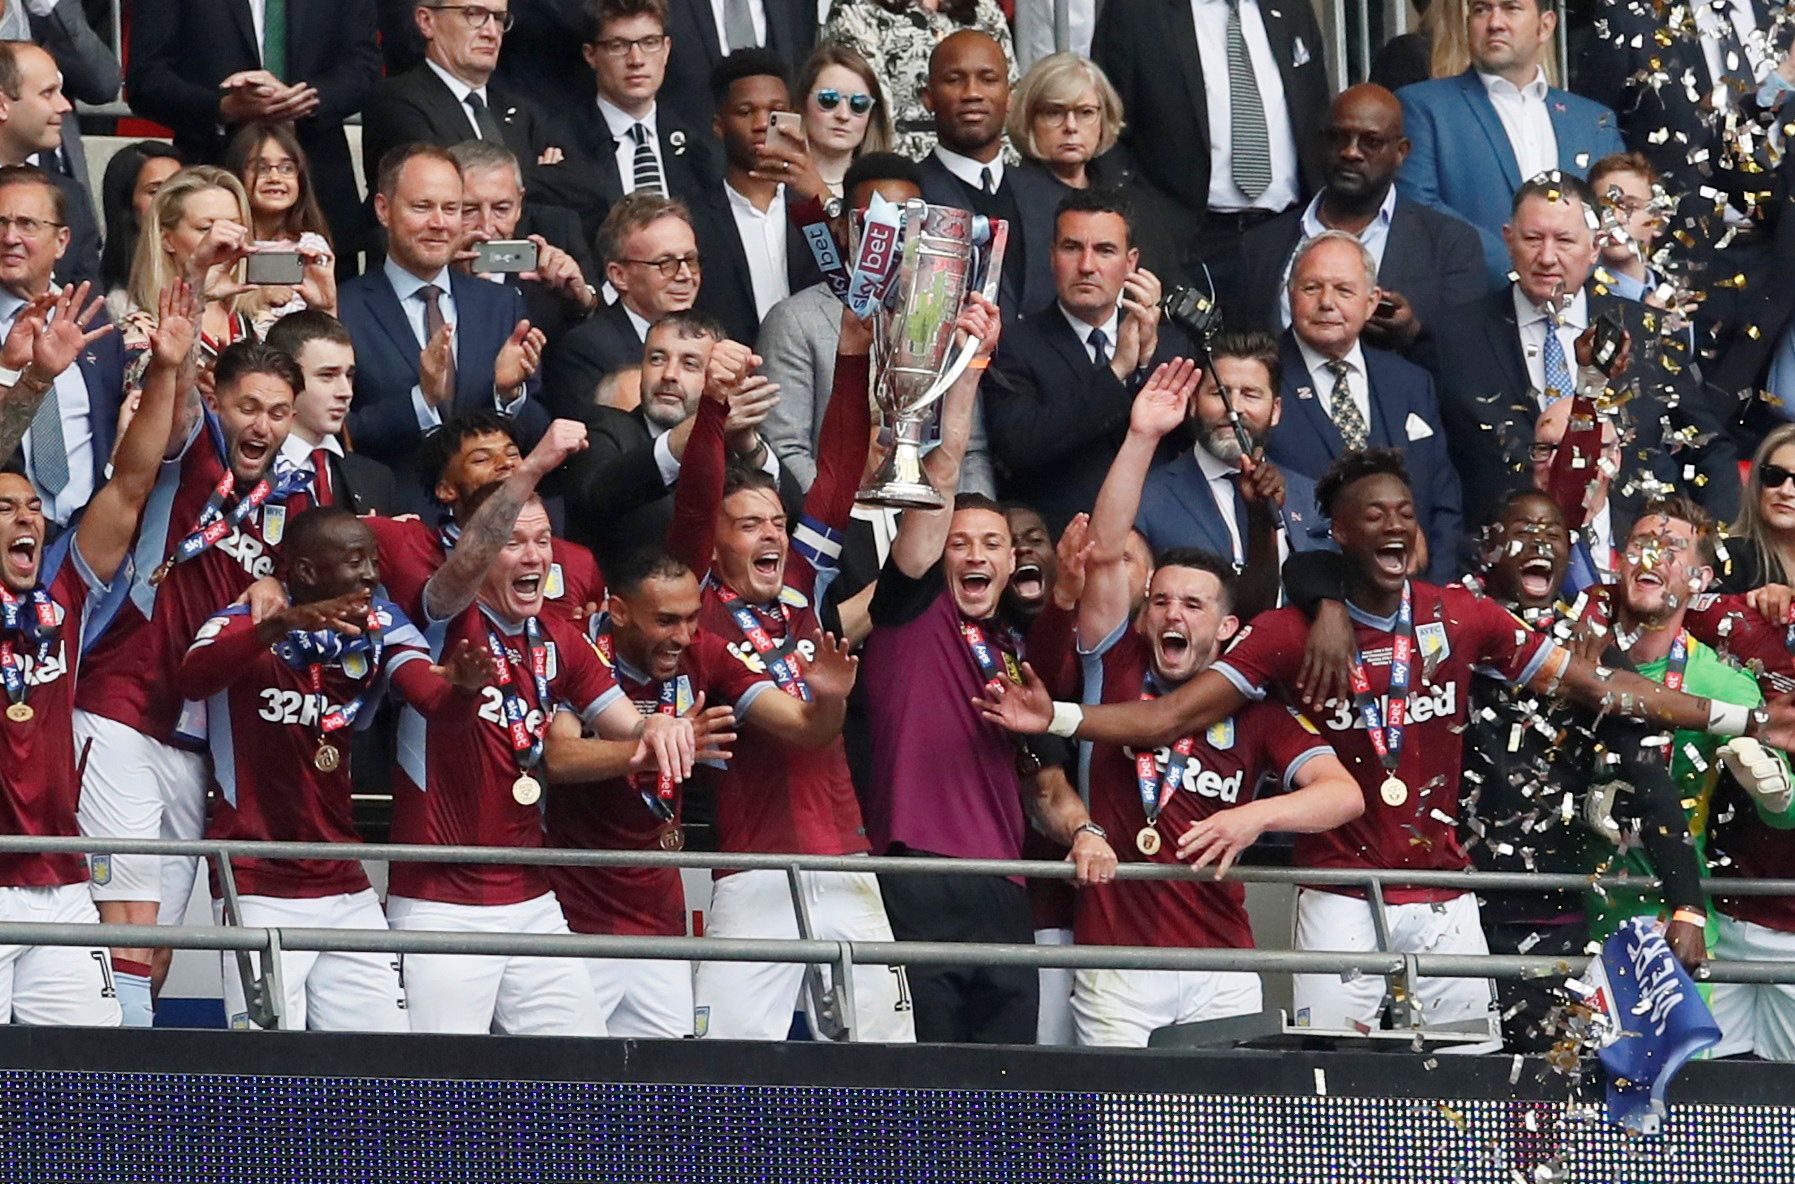 Soccer Football - Championship Playoff Final - Aston Villa v Derby County - Wembley Stadium, London, Britain - May 27, 2019  Aston Villa's Jack Grealish and teammates lift trophy as they celebrate winning the playoffs  REUTERS/David Klein       TPX IMAGES OF THE DAY